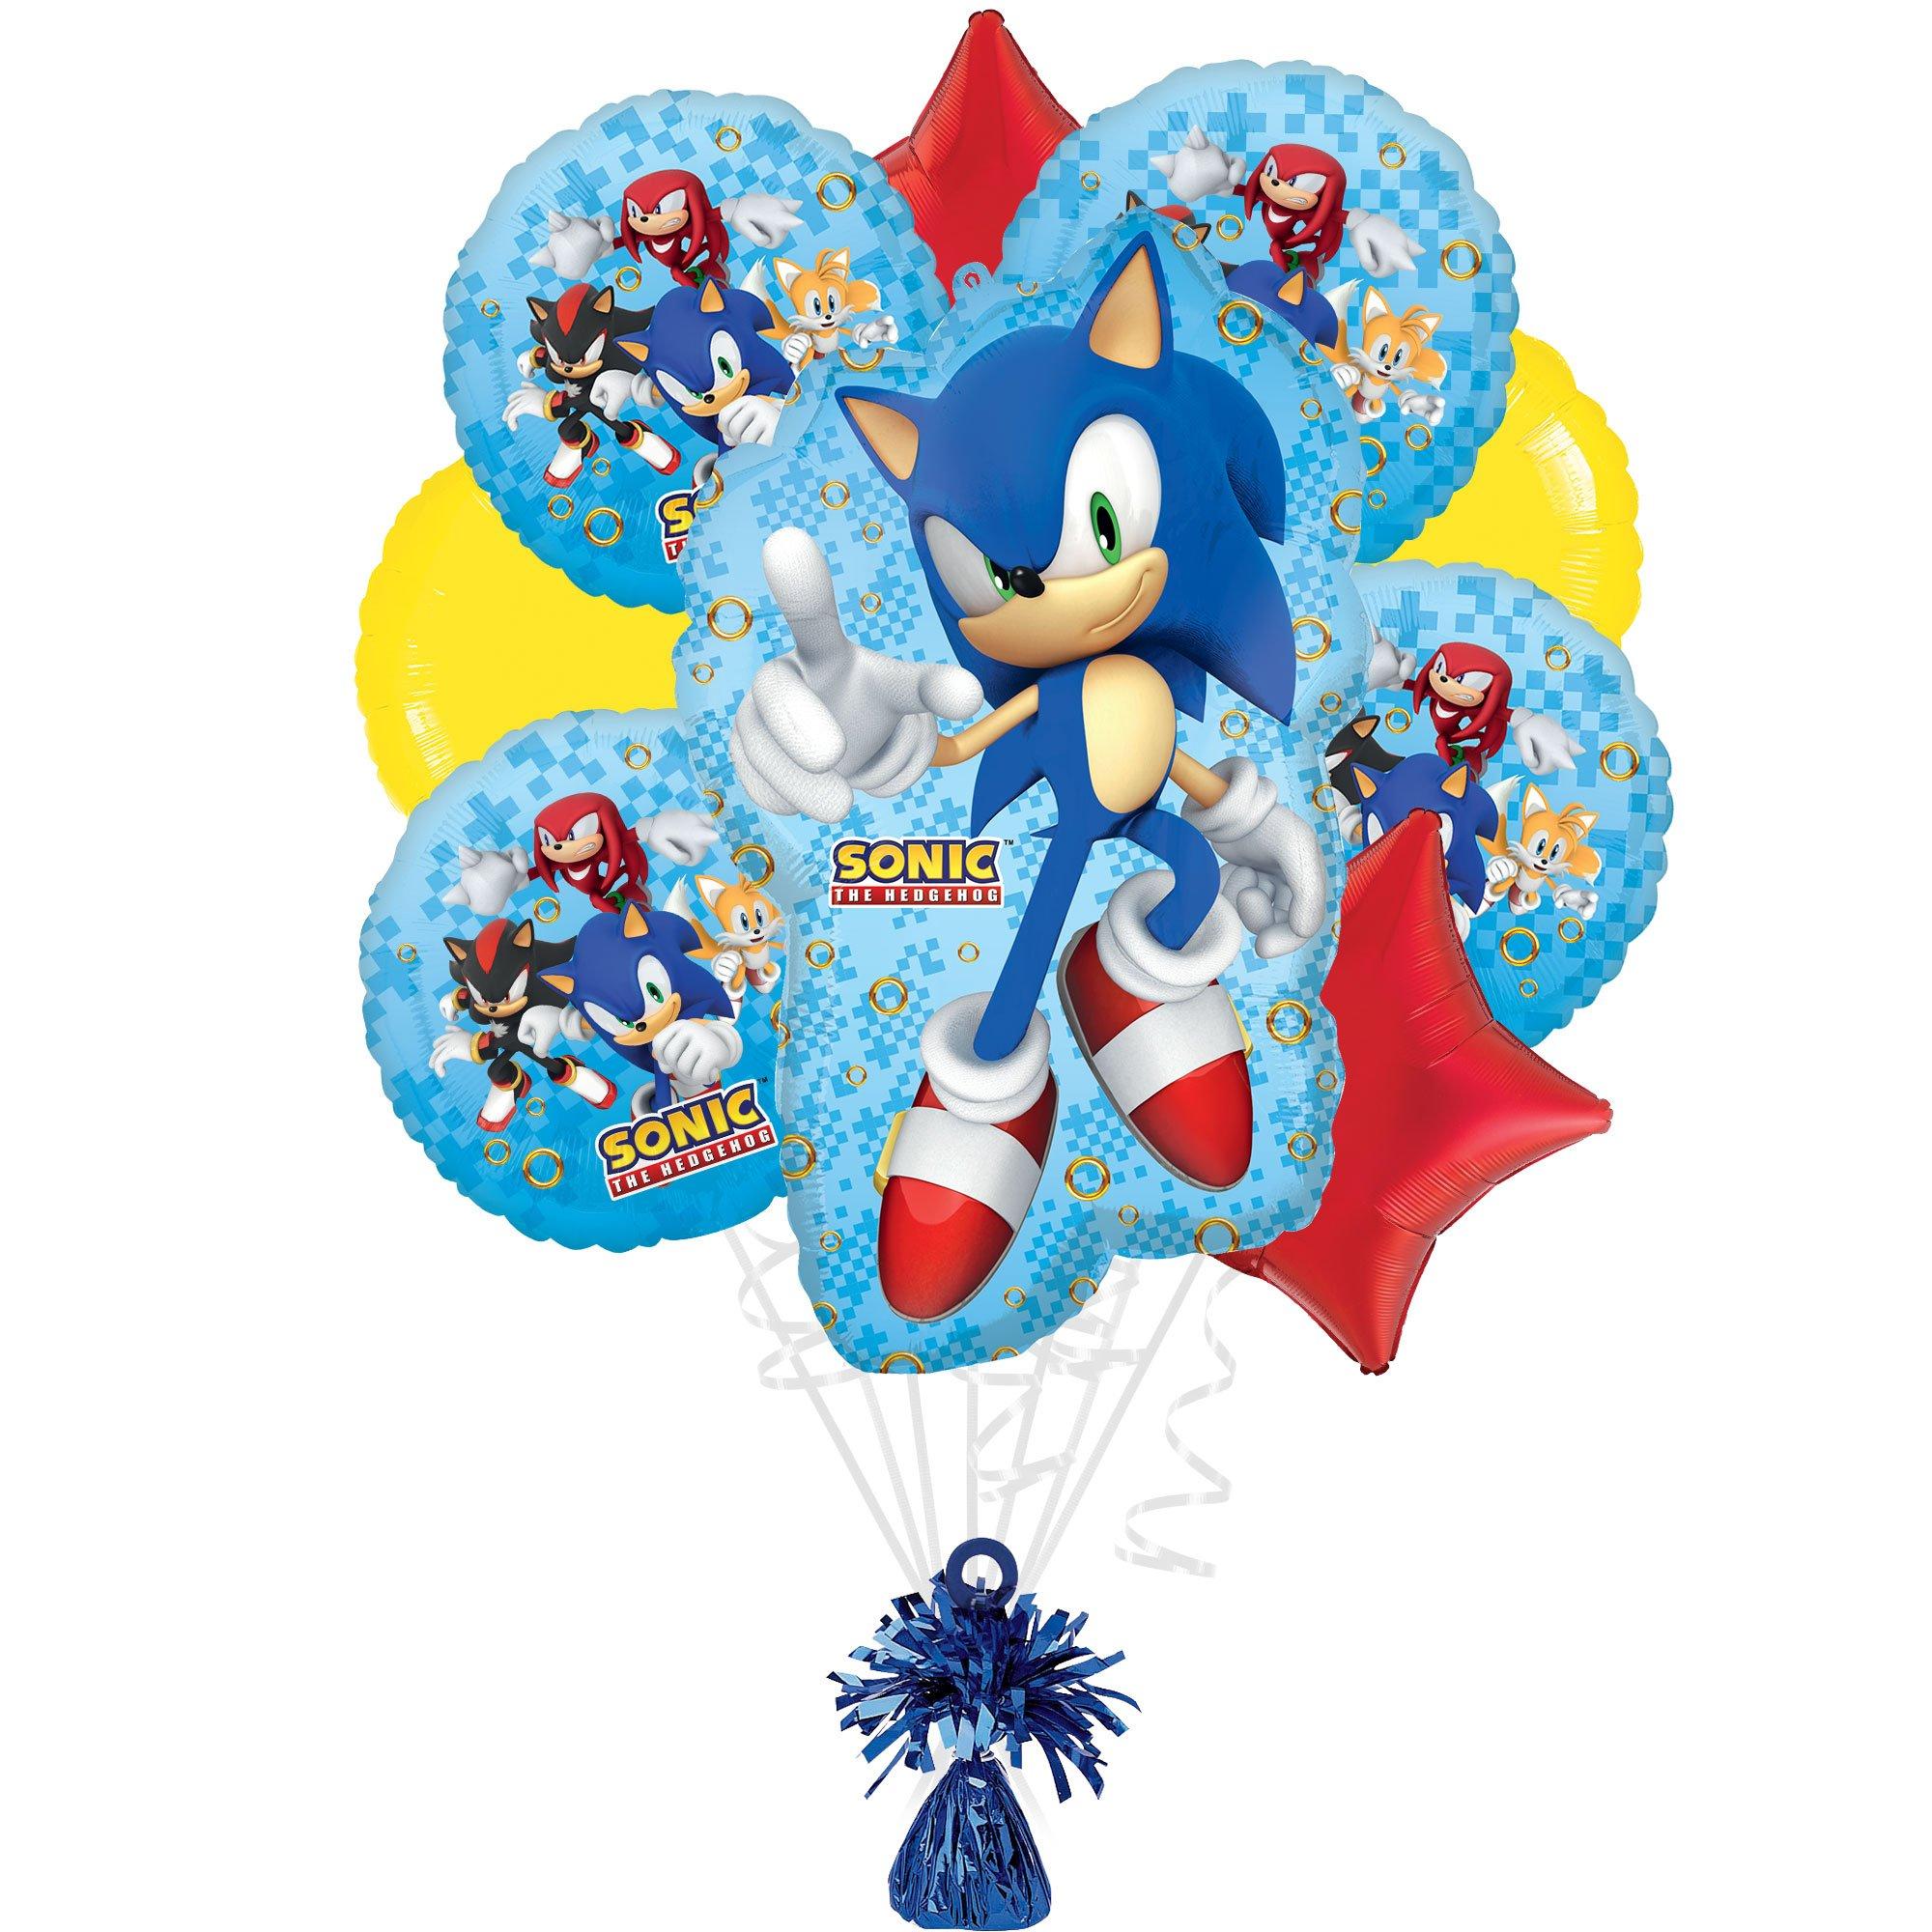 Sonic the Hedgehog 2 Foil Balloon Bouquet with Balloon Weight, 10pc